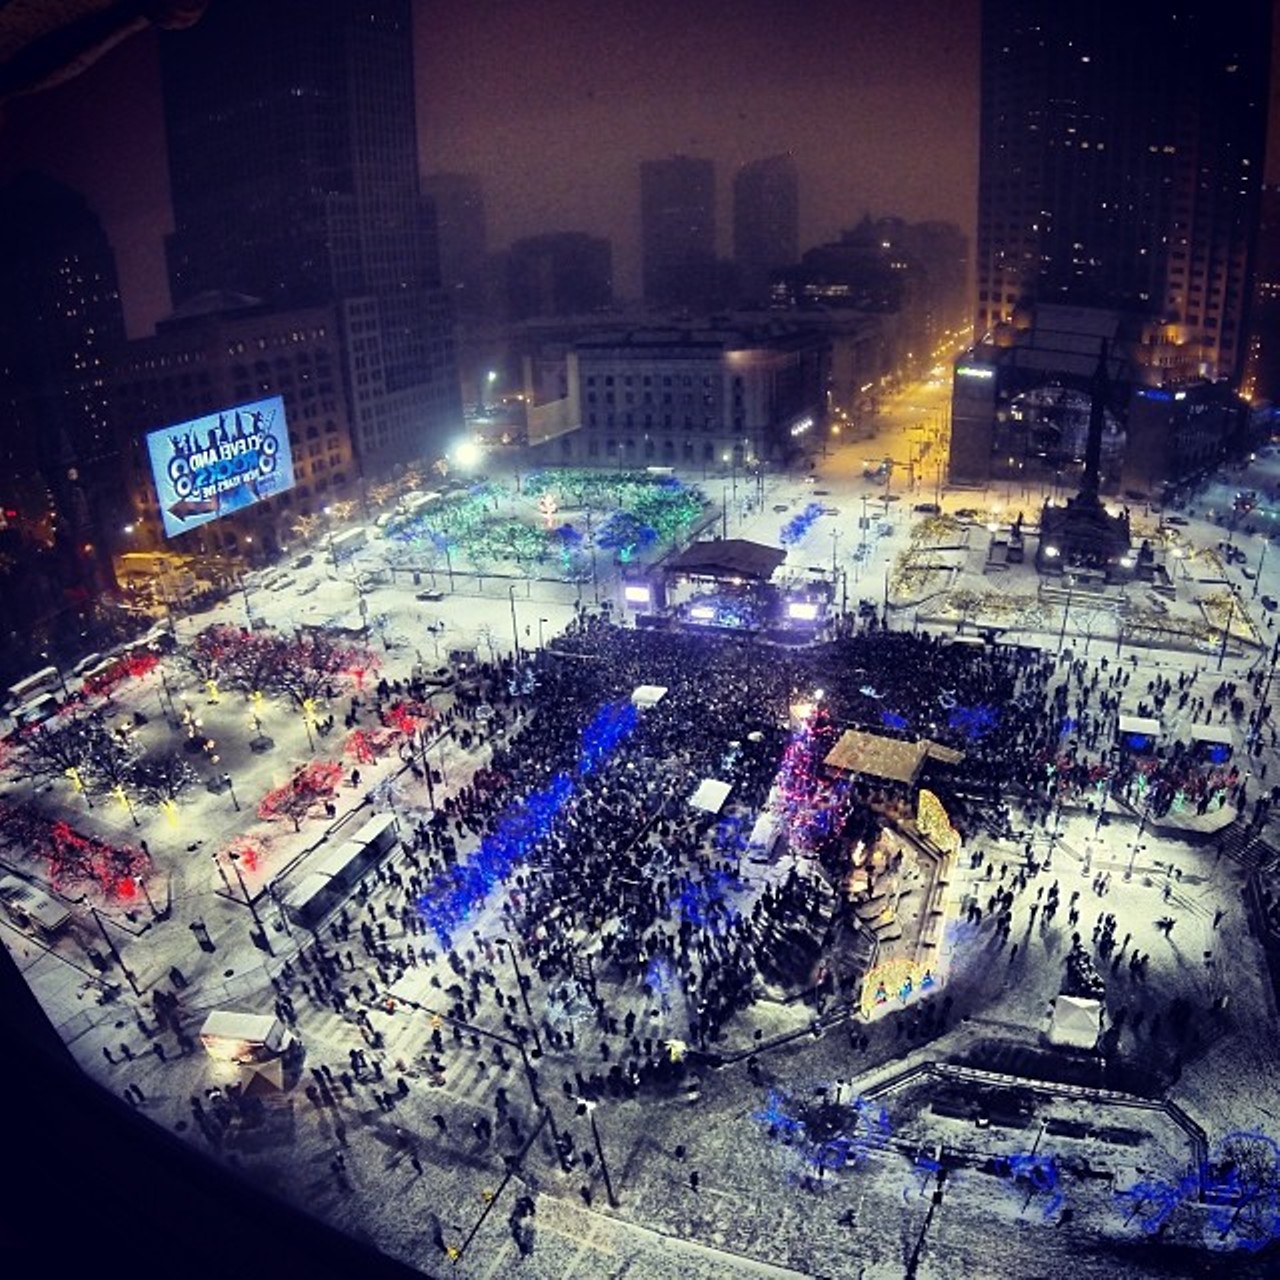 CLEVELAND ROCKS NYE 2014 By far one of the most epic events I have ever been a part of! #NYE #CLEVELAND #GOPRO #TIMELAPSE #PUBLICSQUARE